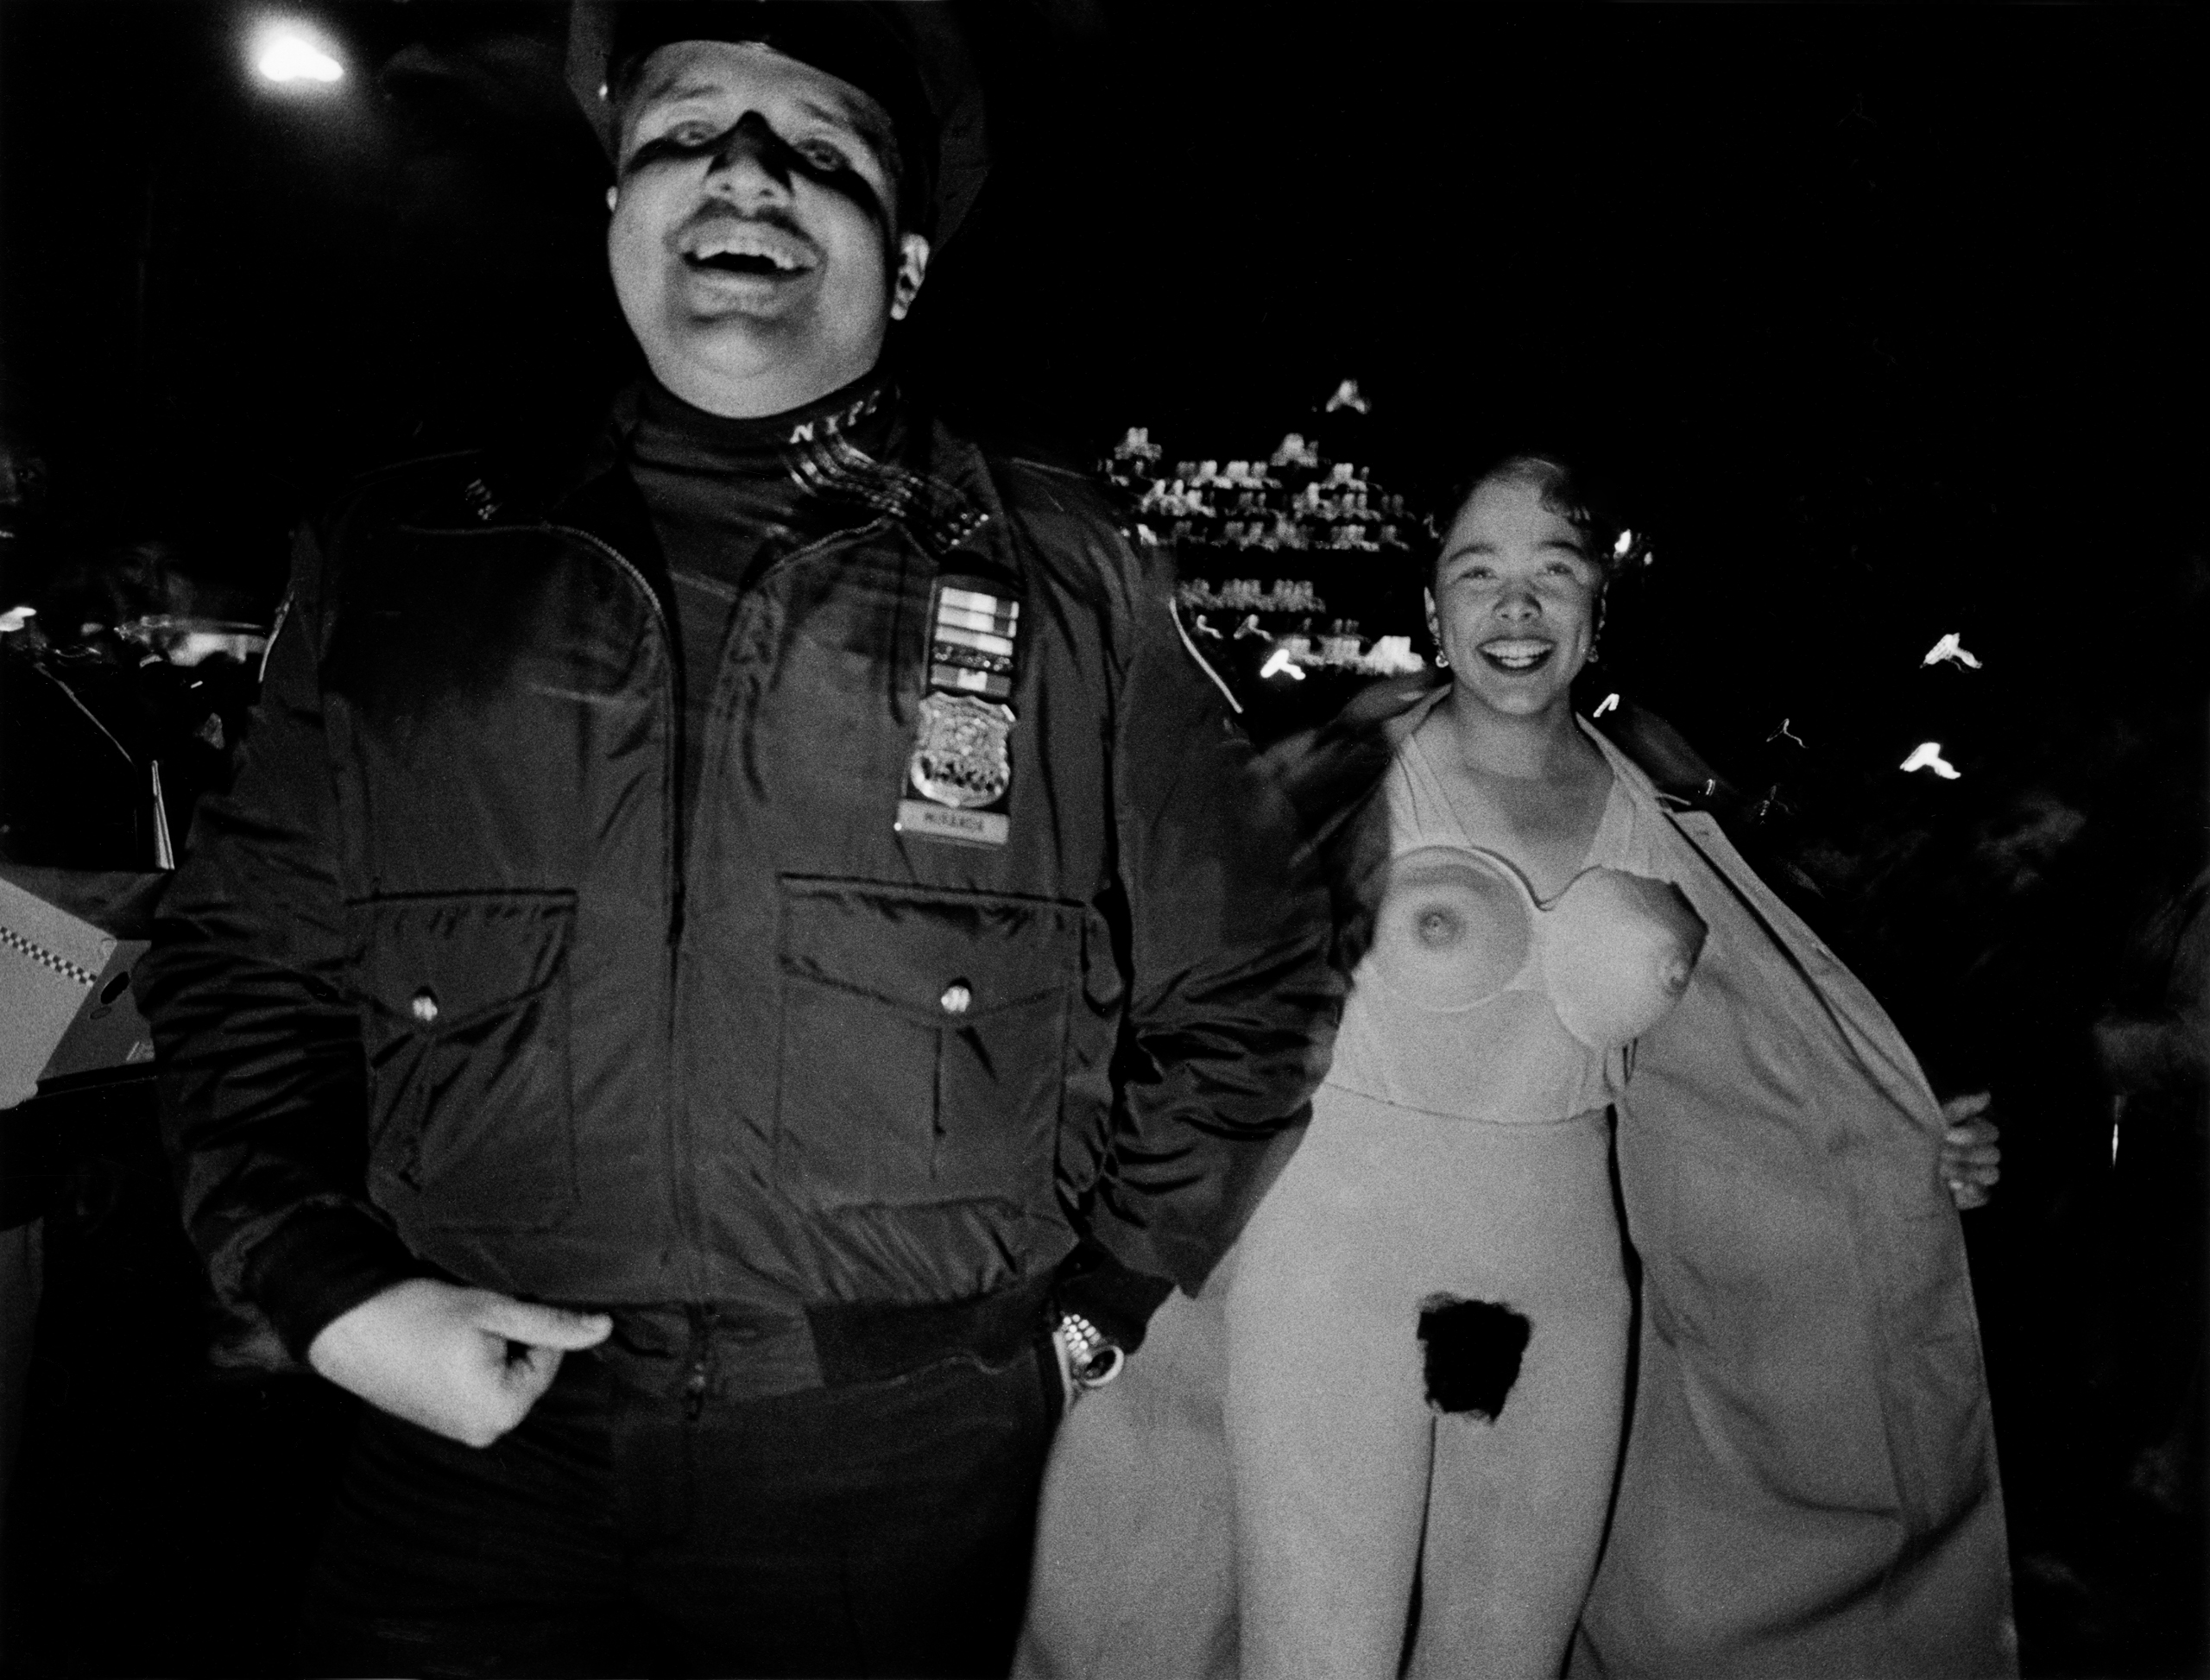 A woman flashes the camera at the New York City Halloween Parade, 1994.